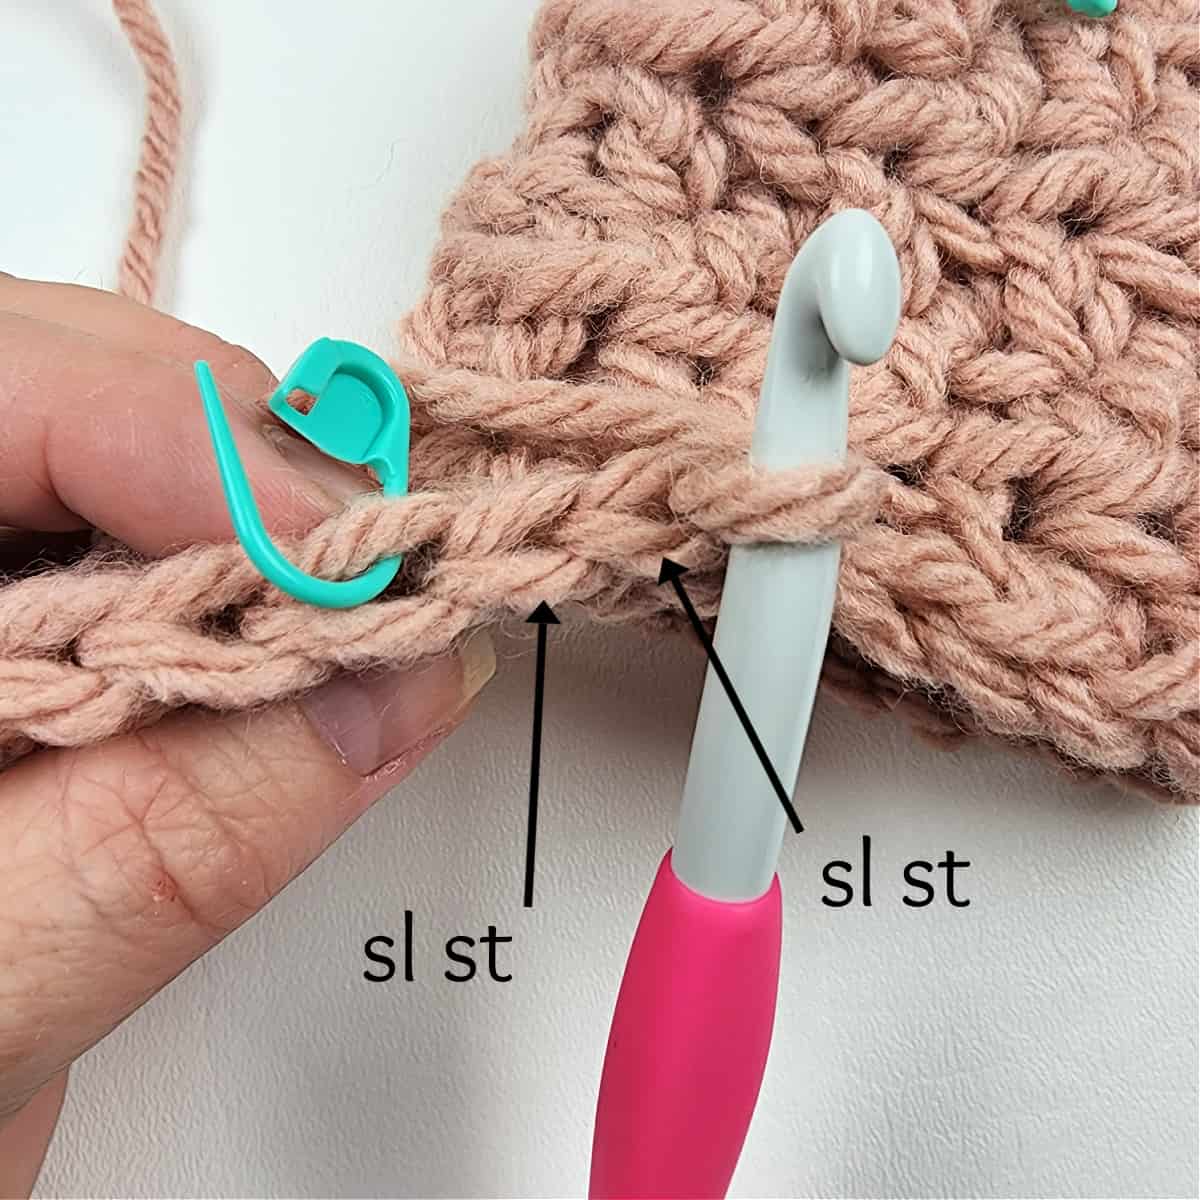 After turning to work the rest of Row 2, you can see the 2 sl sts you worked before turning, and the stitch marked where you will work the first hdc.